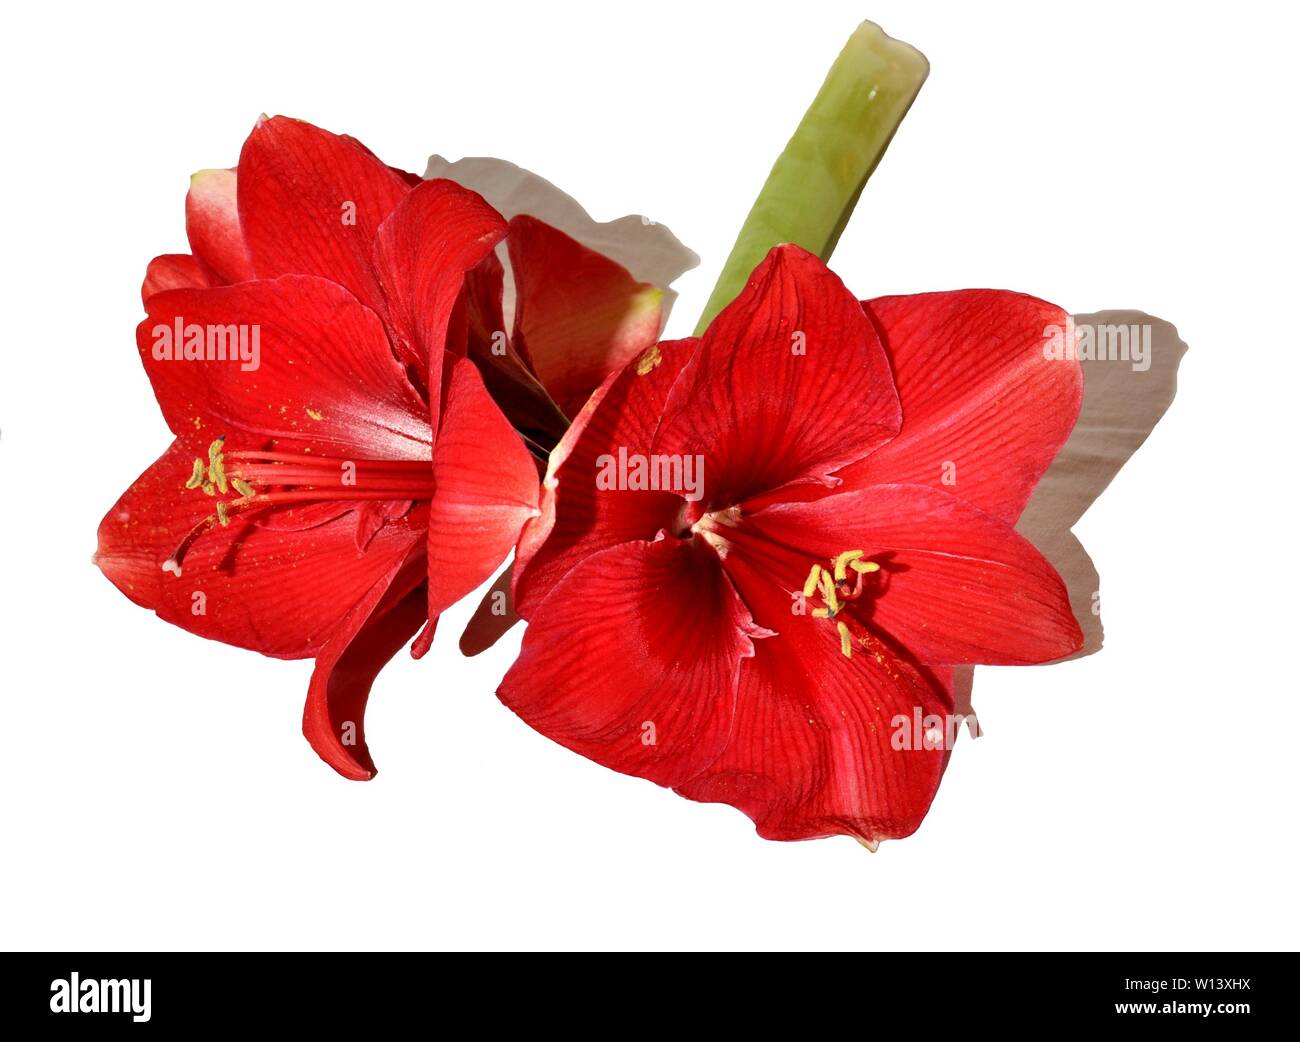 bright red amaryllis flower on a white background Stock Photo